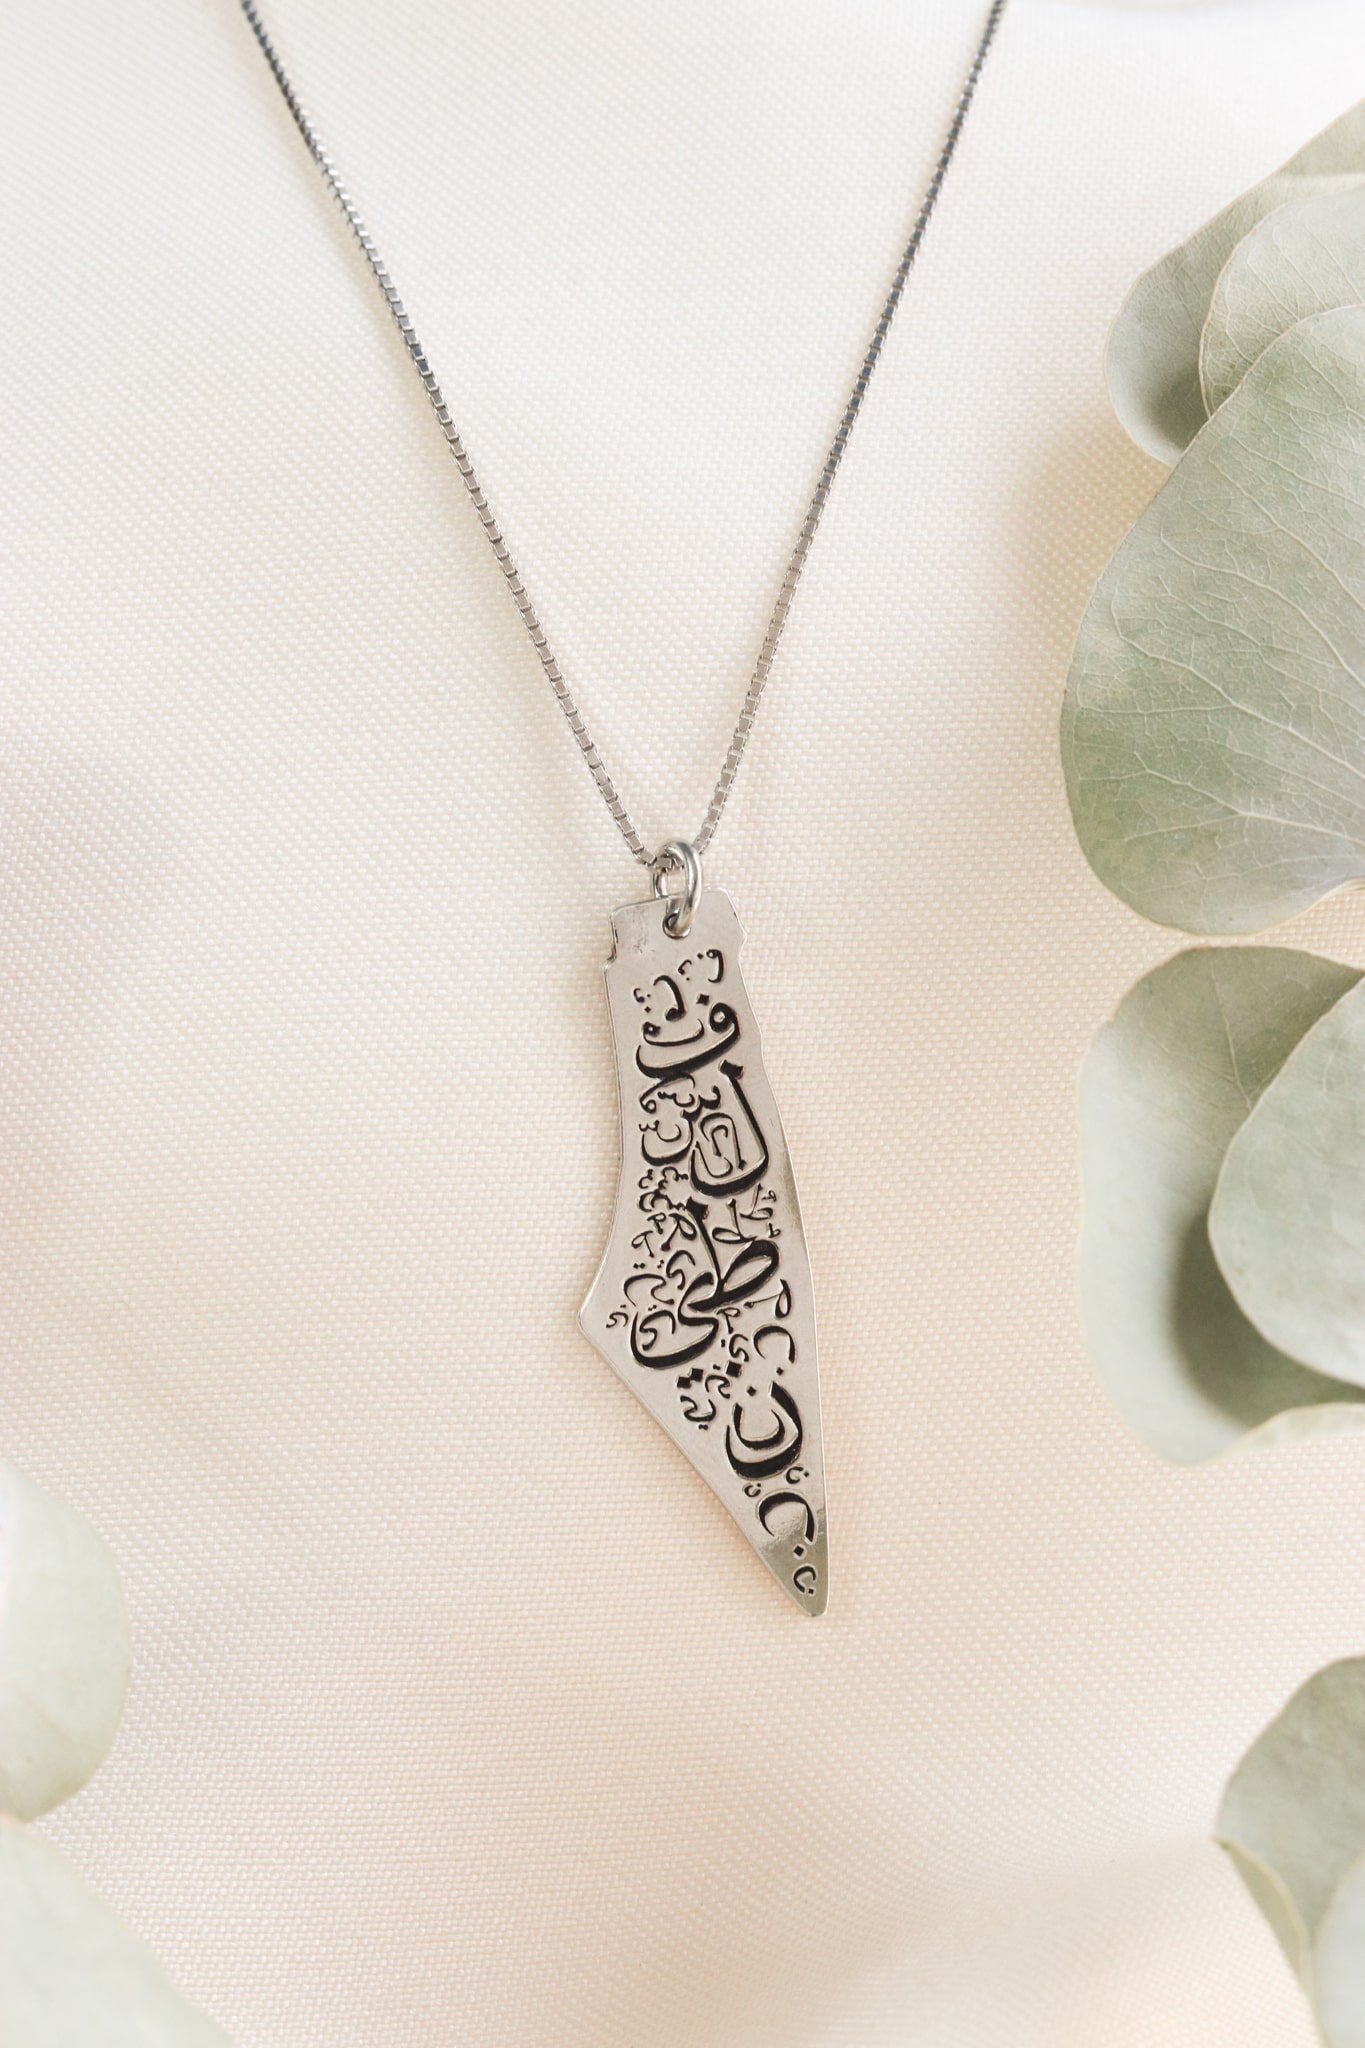 Palestine map with Palestine Arabic letter inside necklace